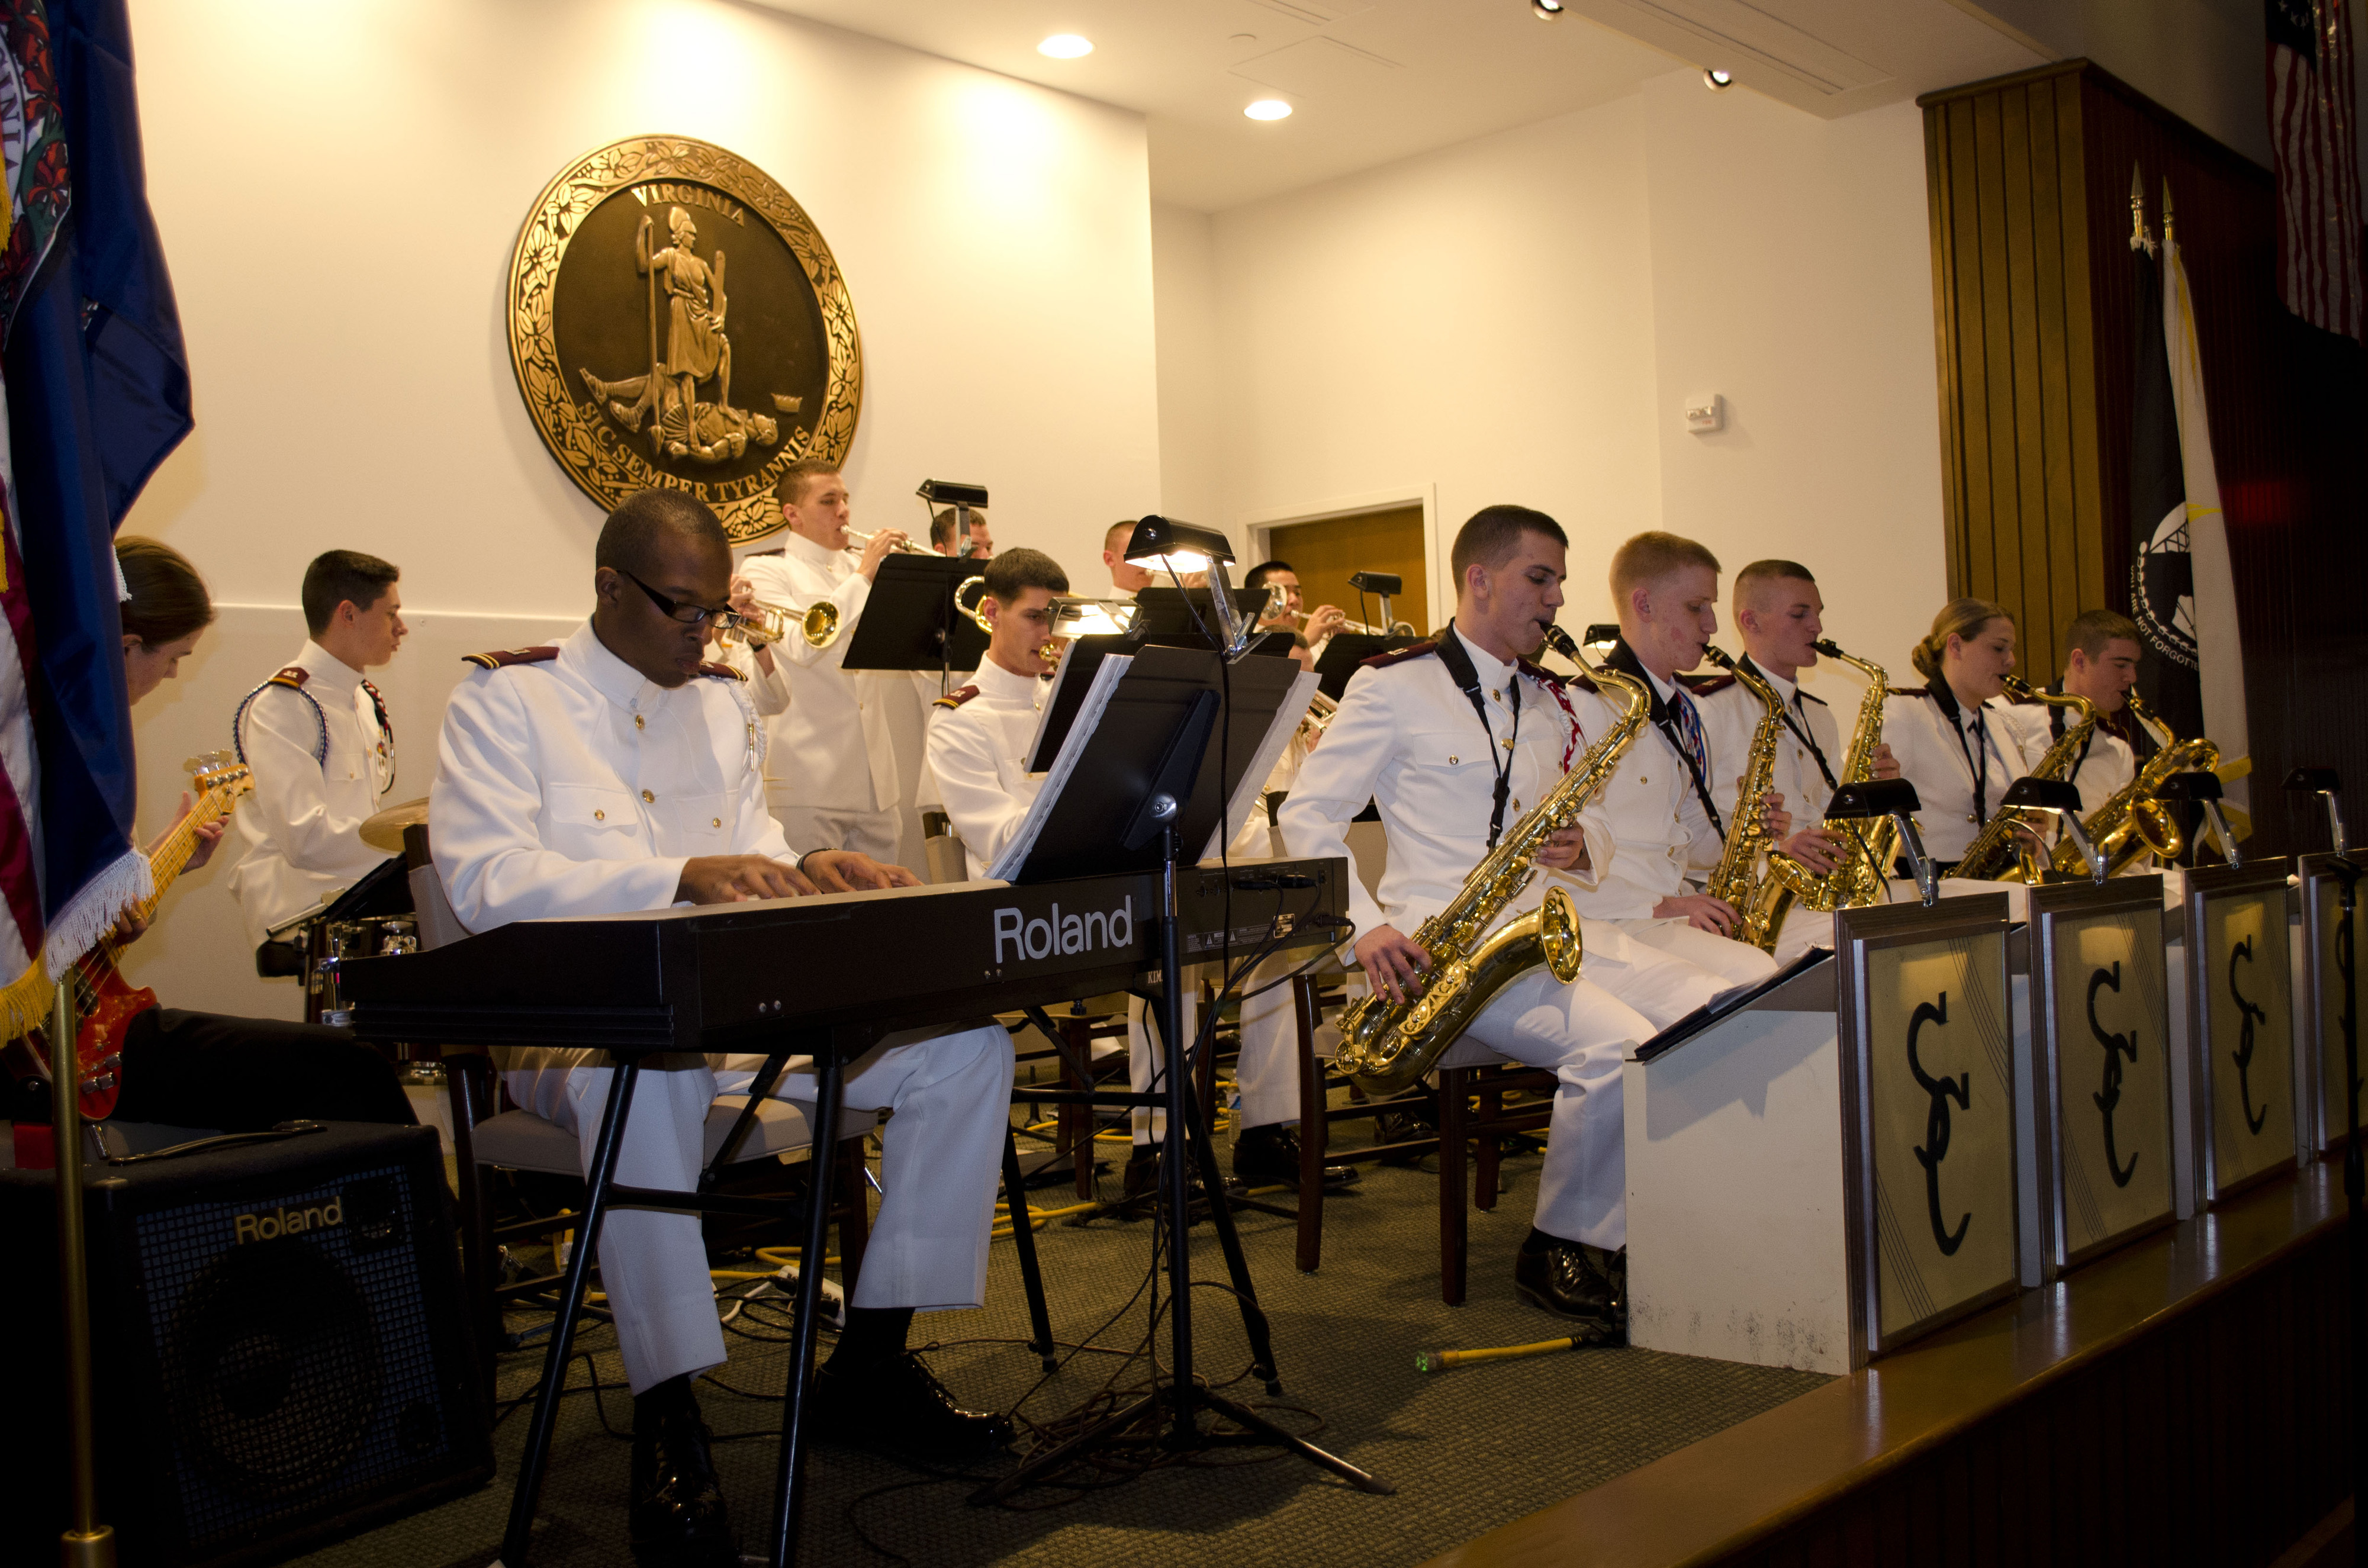 The Southern Colonels, the Virginia Tech Corps of Cadets jazz ensemble, seen performing at a recent event.